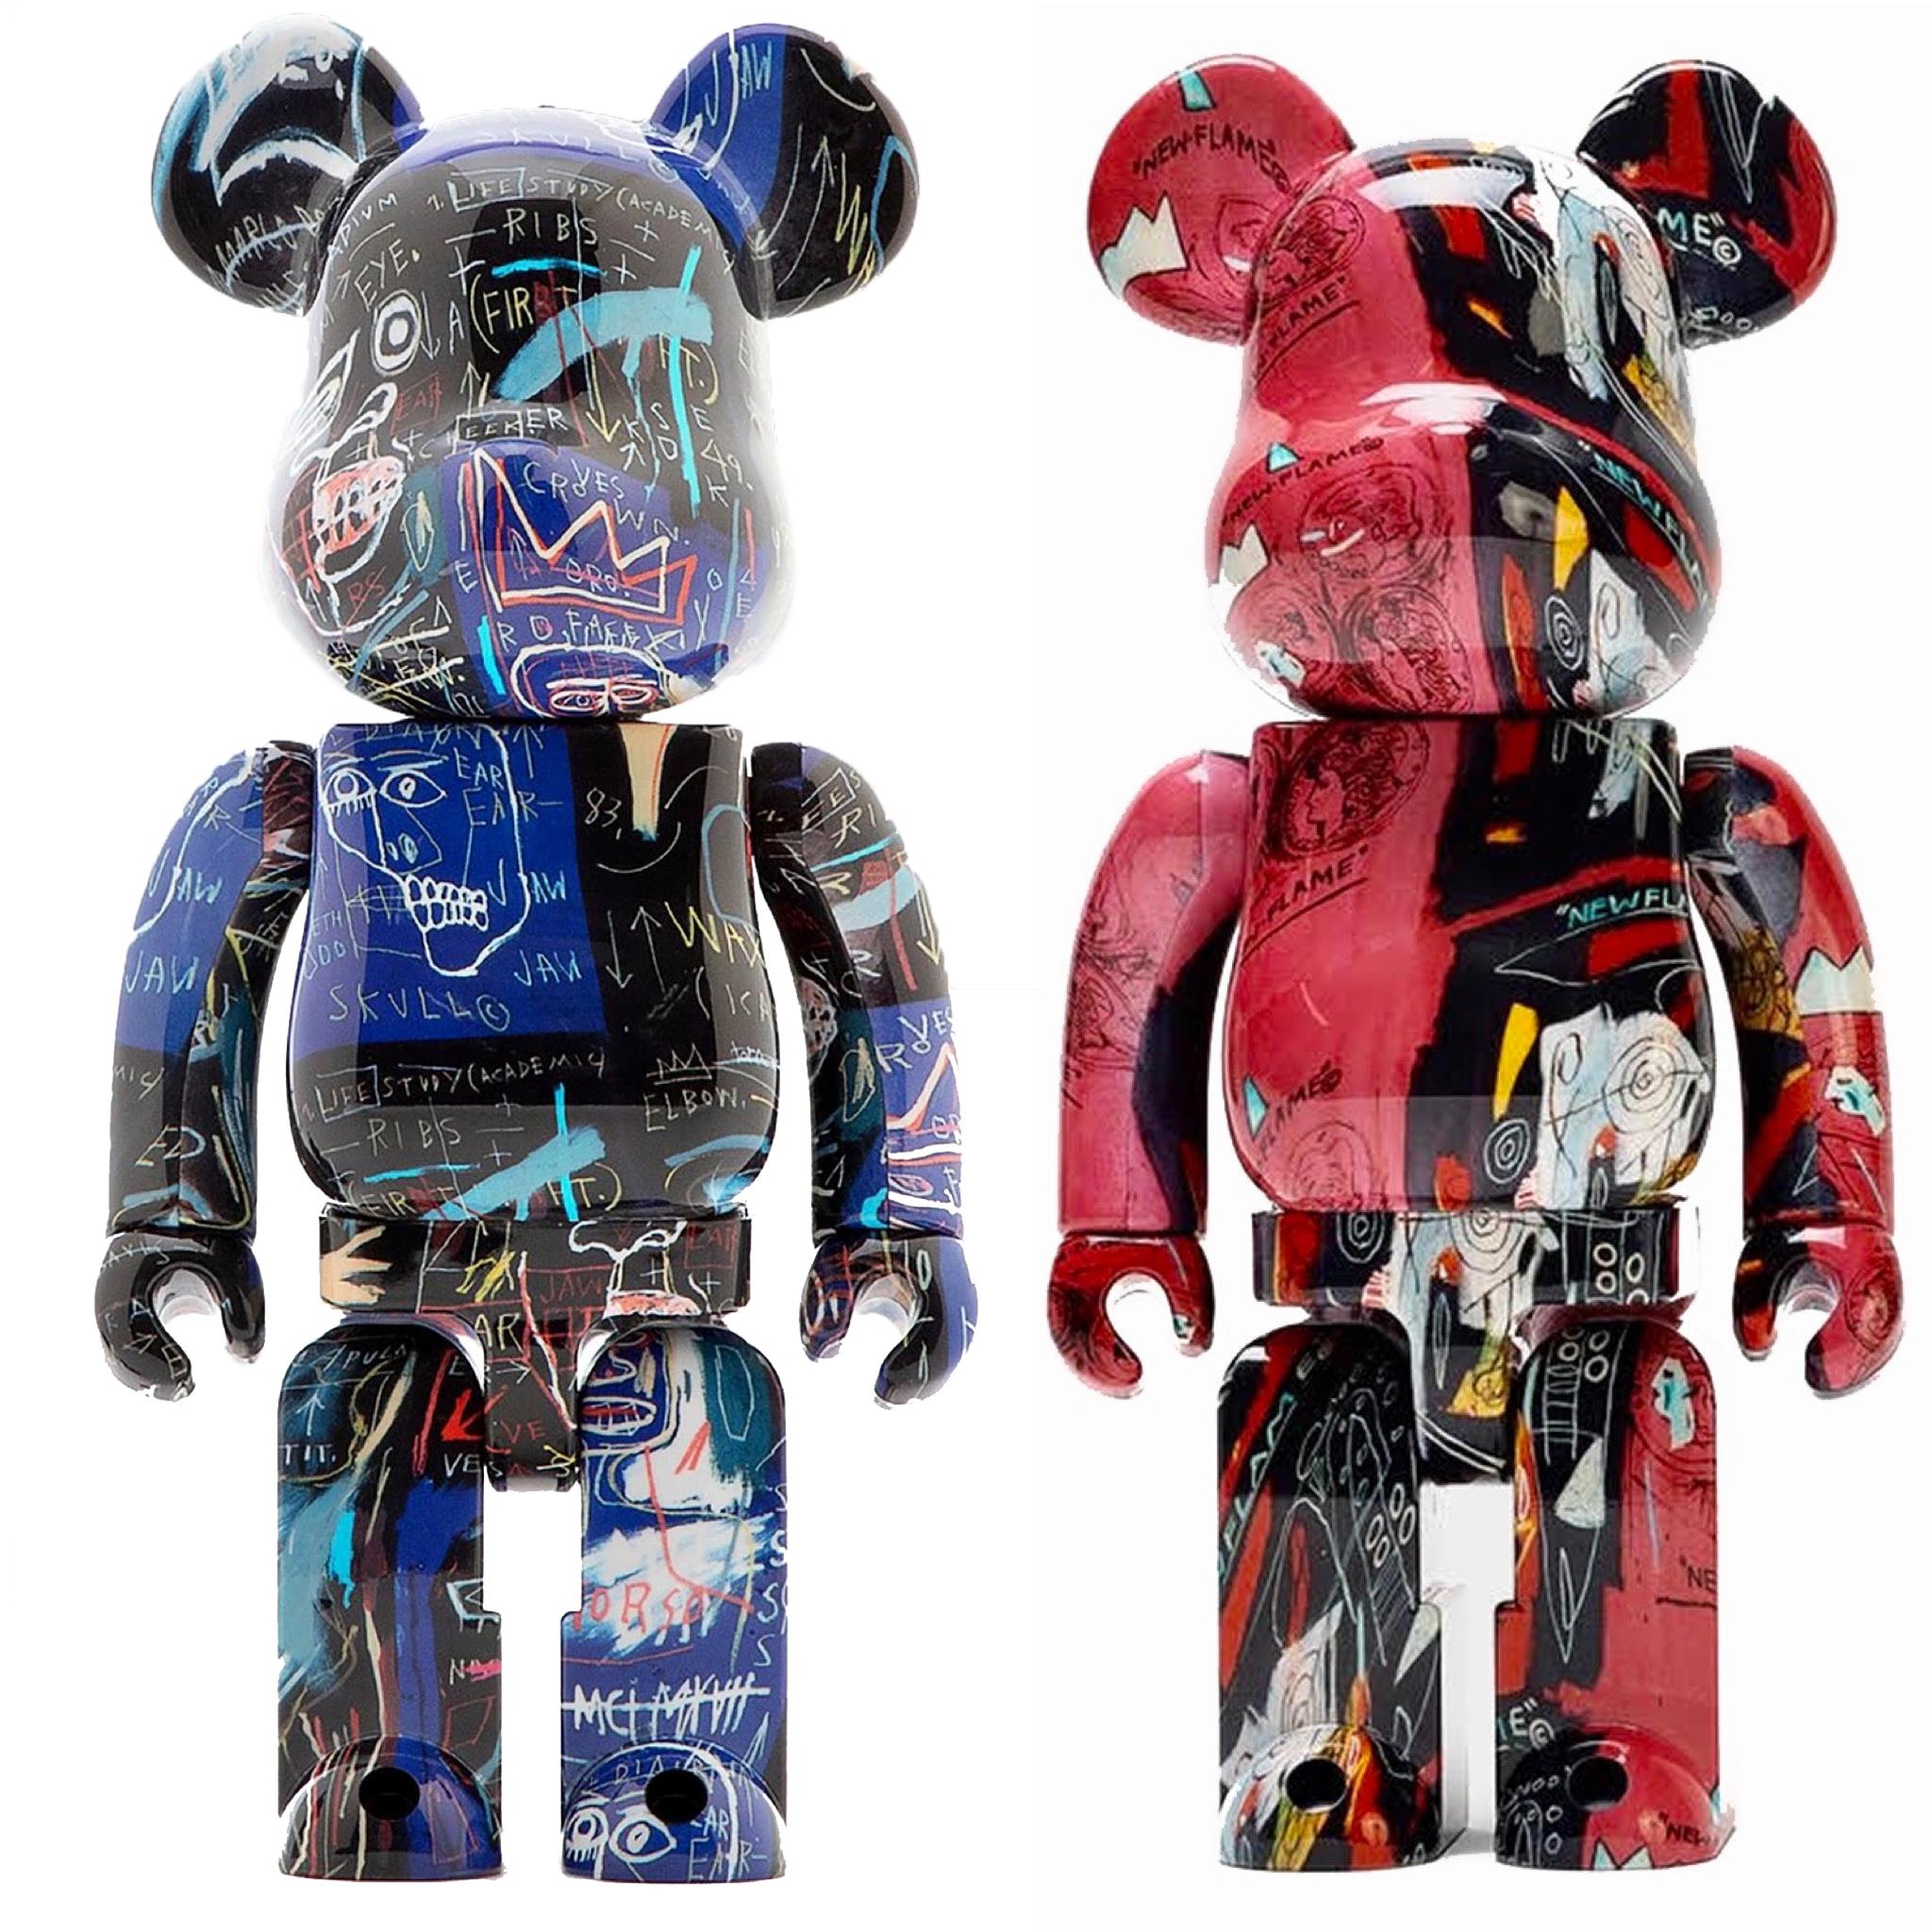 Be@rbrick x Warhol and Basquiat Estates 400% and 100%, set of 2 works